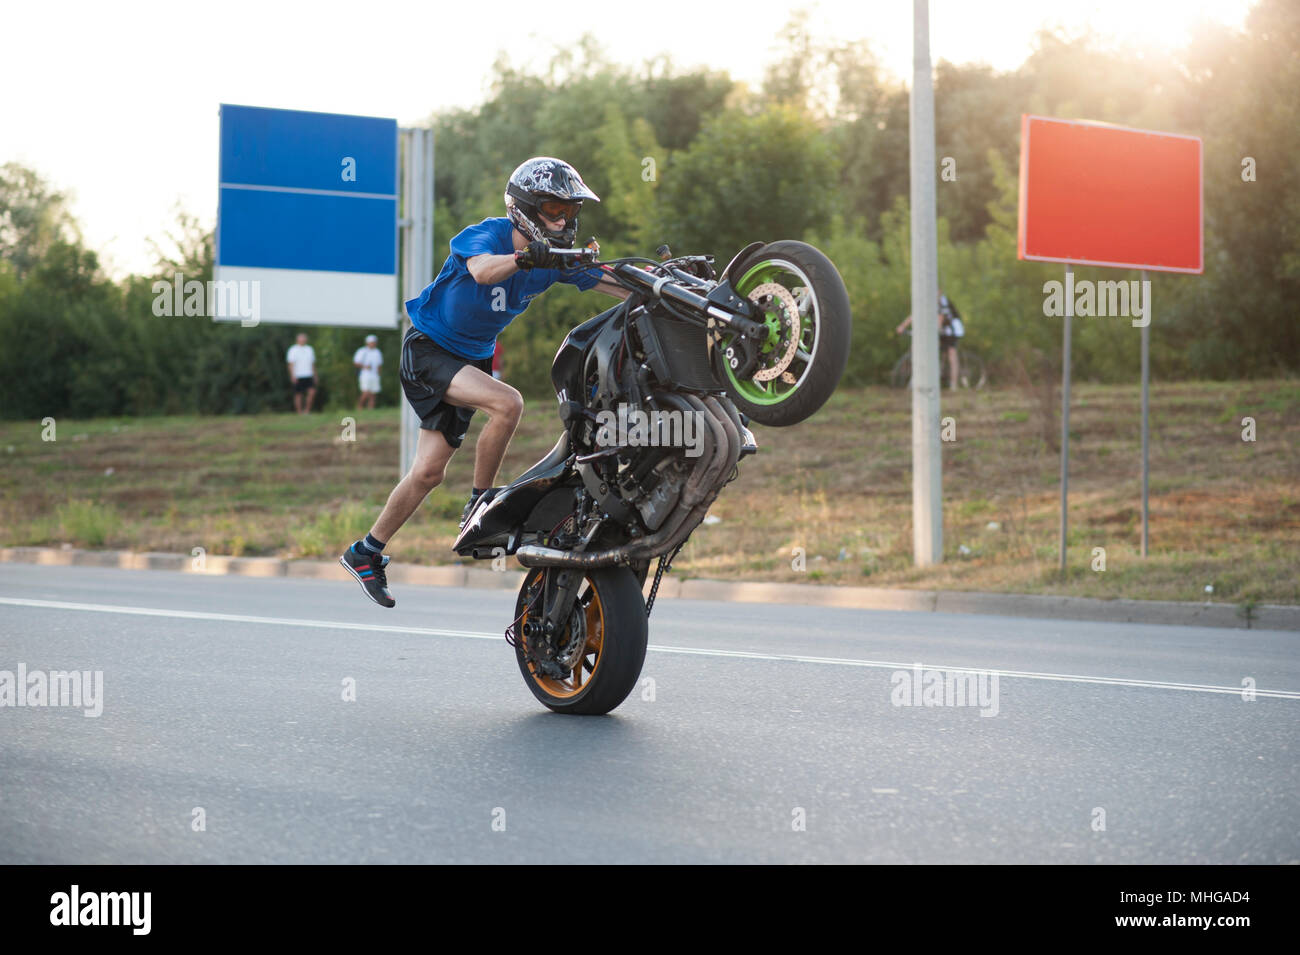 Ivano-Frankivsk, Ukraine - 9 August 2015: Sideview of moving biker making extremely dangerous stunt on his fast sport motorcycle. Doesn't feel fear,feeling confident, having expirience. Stock Photo